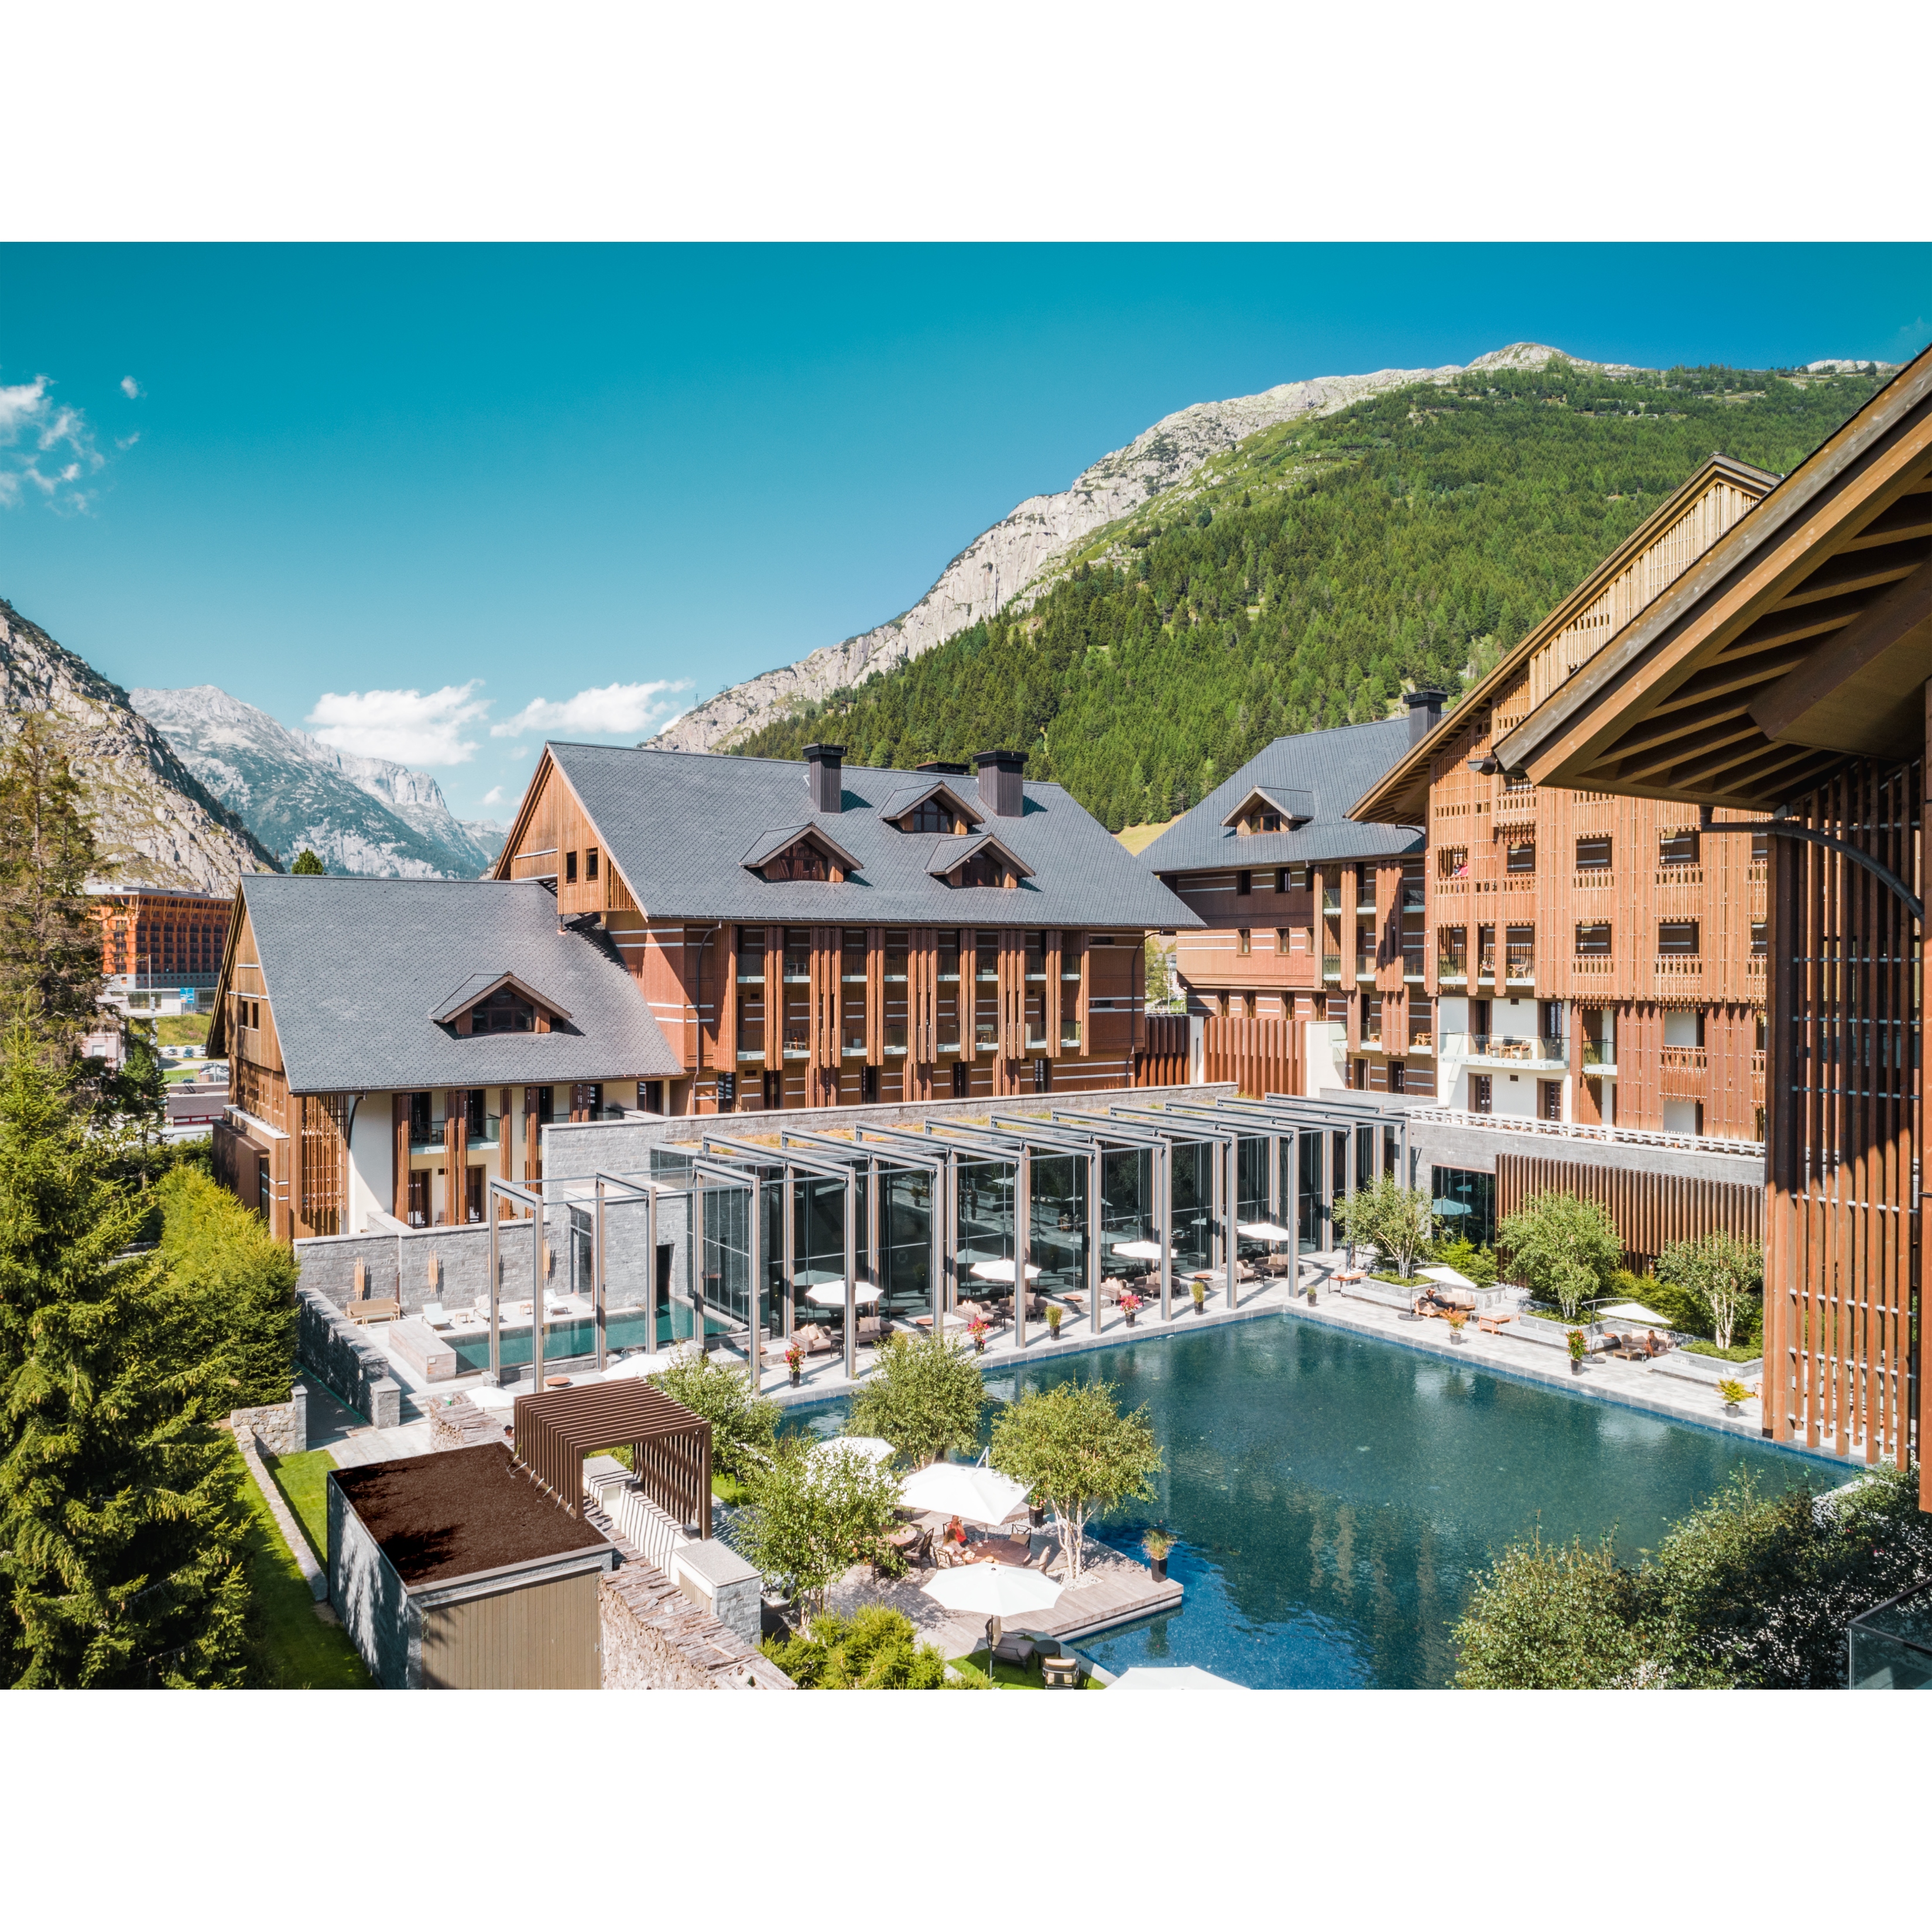 An Overview of The Chedi Andermatt Courtyard.